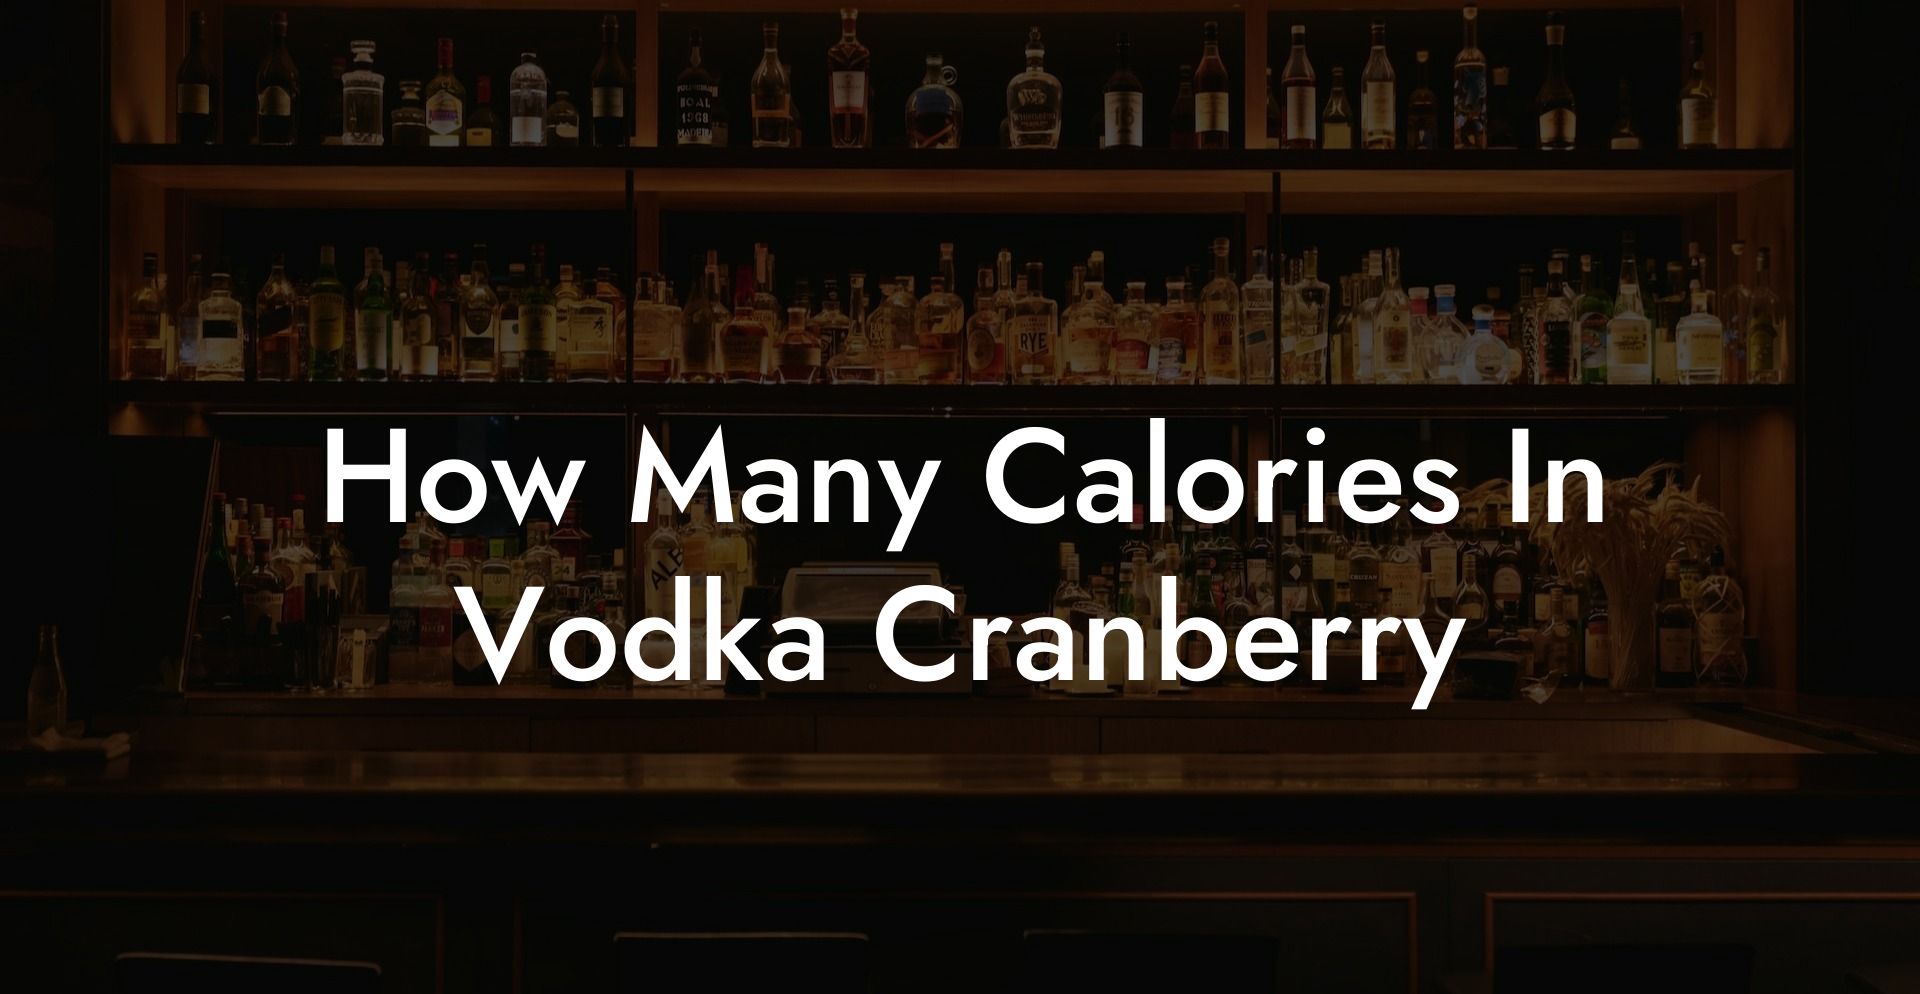 How Many Calories In Vodka Cranberry